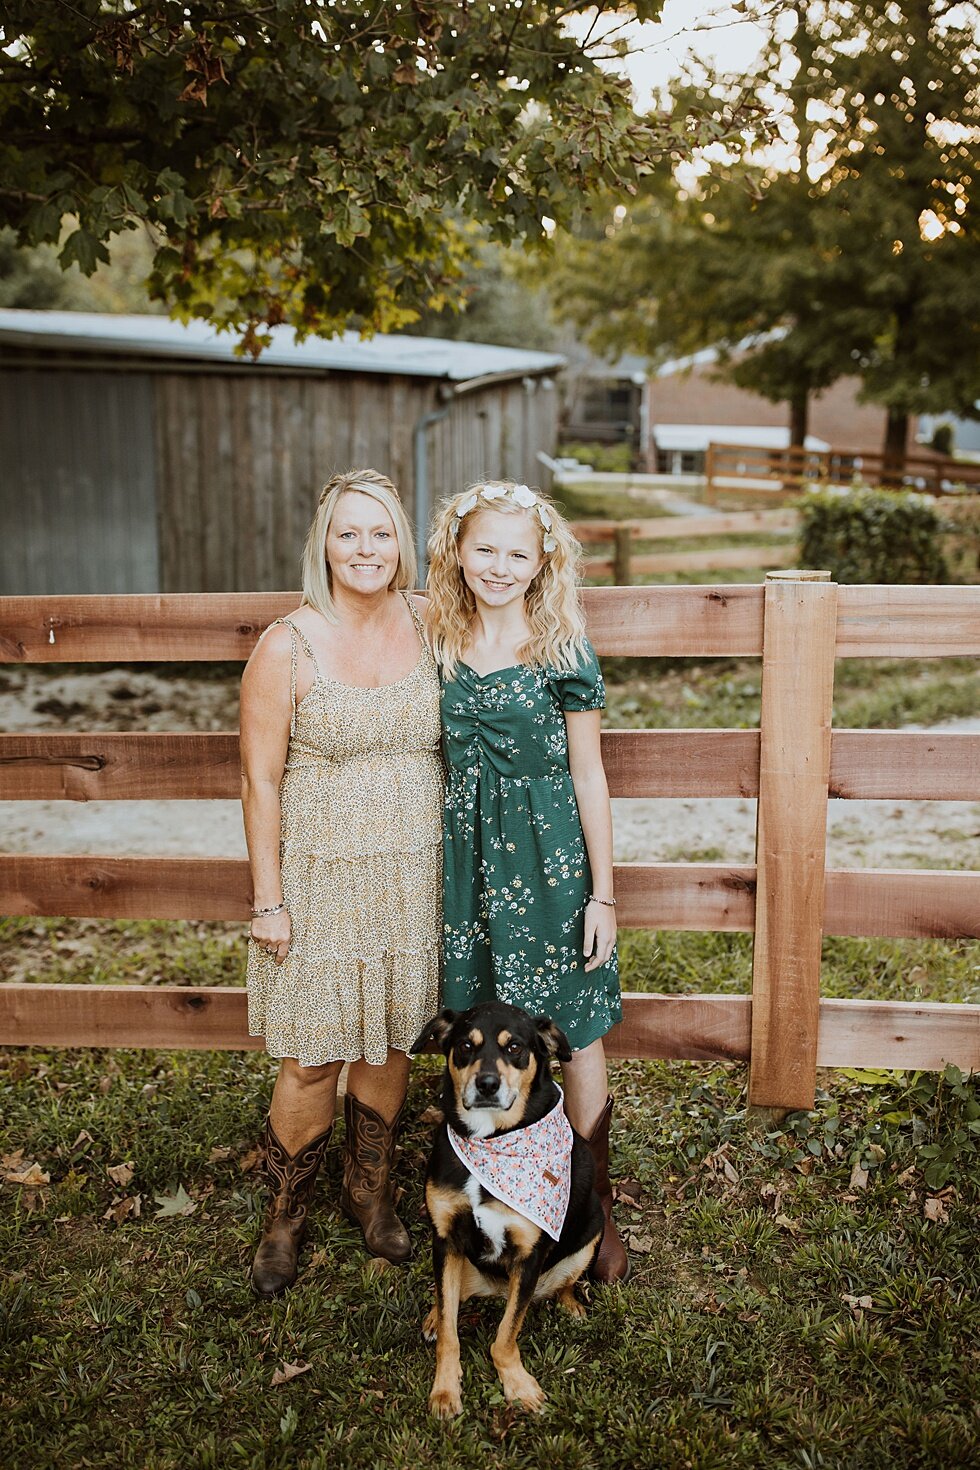  All kinds of animals entered this photo session to get their picture taken with this mother and daughter duo. Fall Louisville Kentucky photographer mother daughter photography session portraits loving relationship western girls country roots #mother